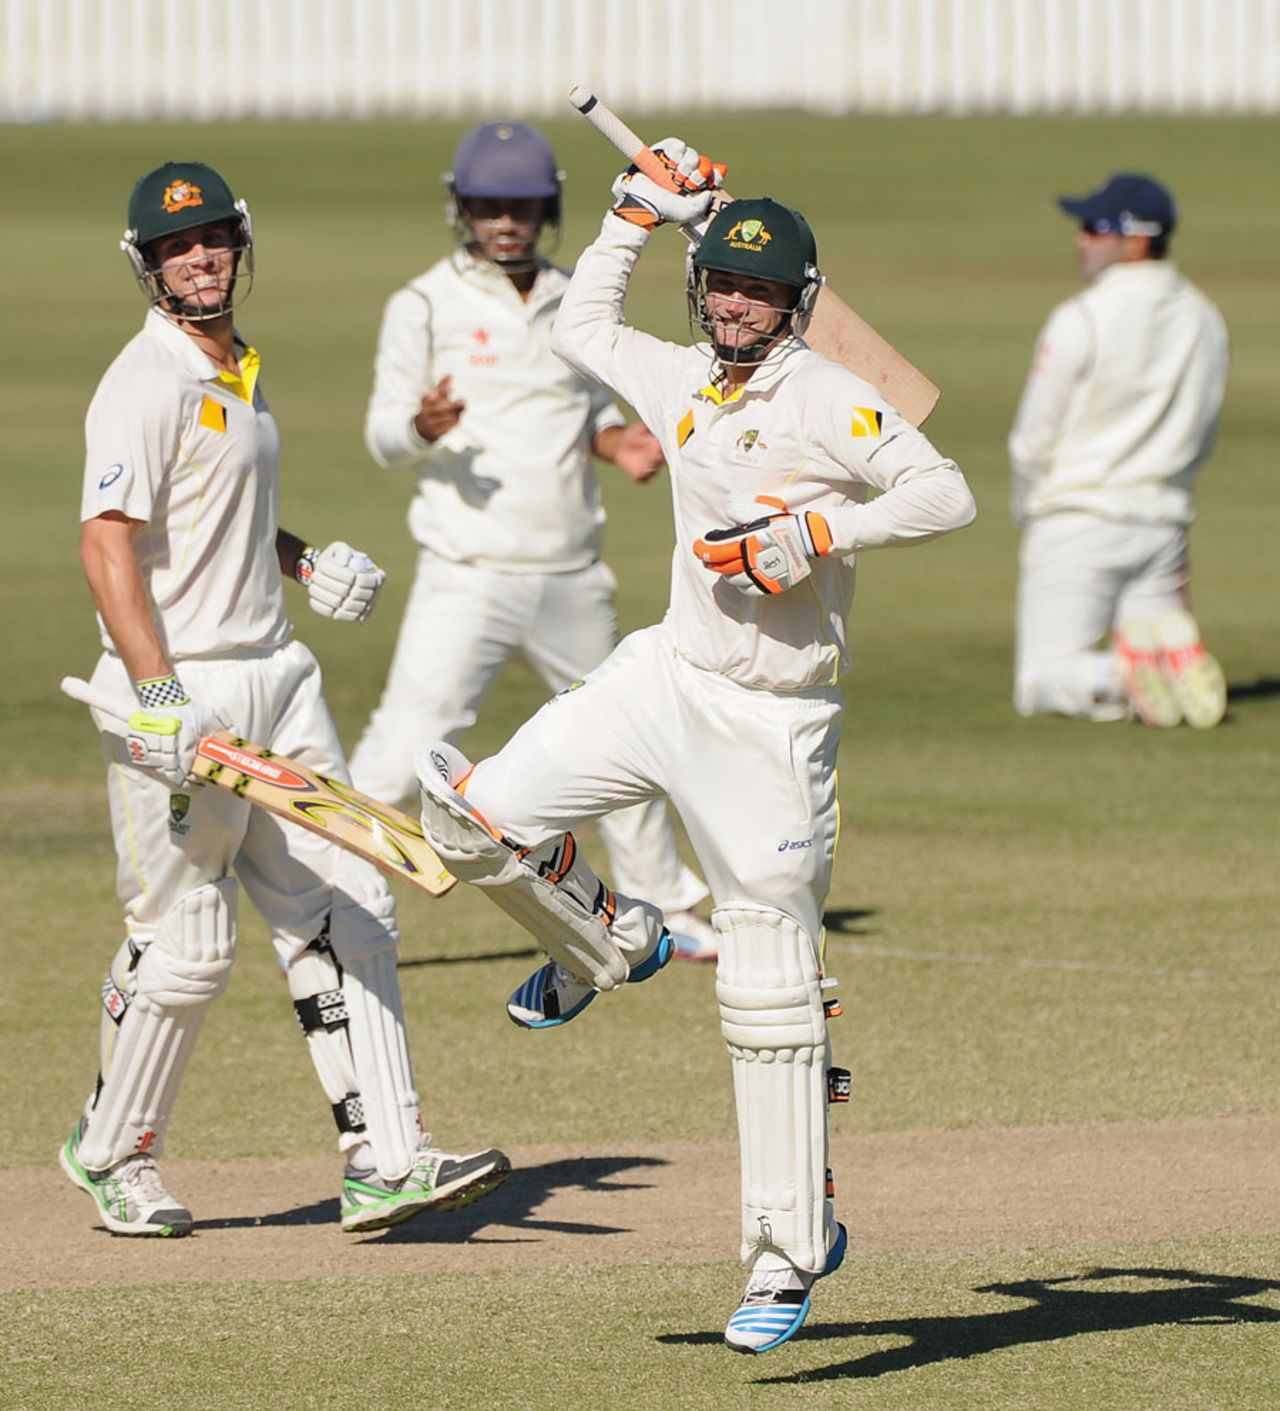 Sam Whiteman celebrates his maiden first-class hundred, Australia A v India A, 1st unofficial Test, Brisbane, 3rd day, July 8, 2014